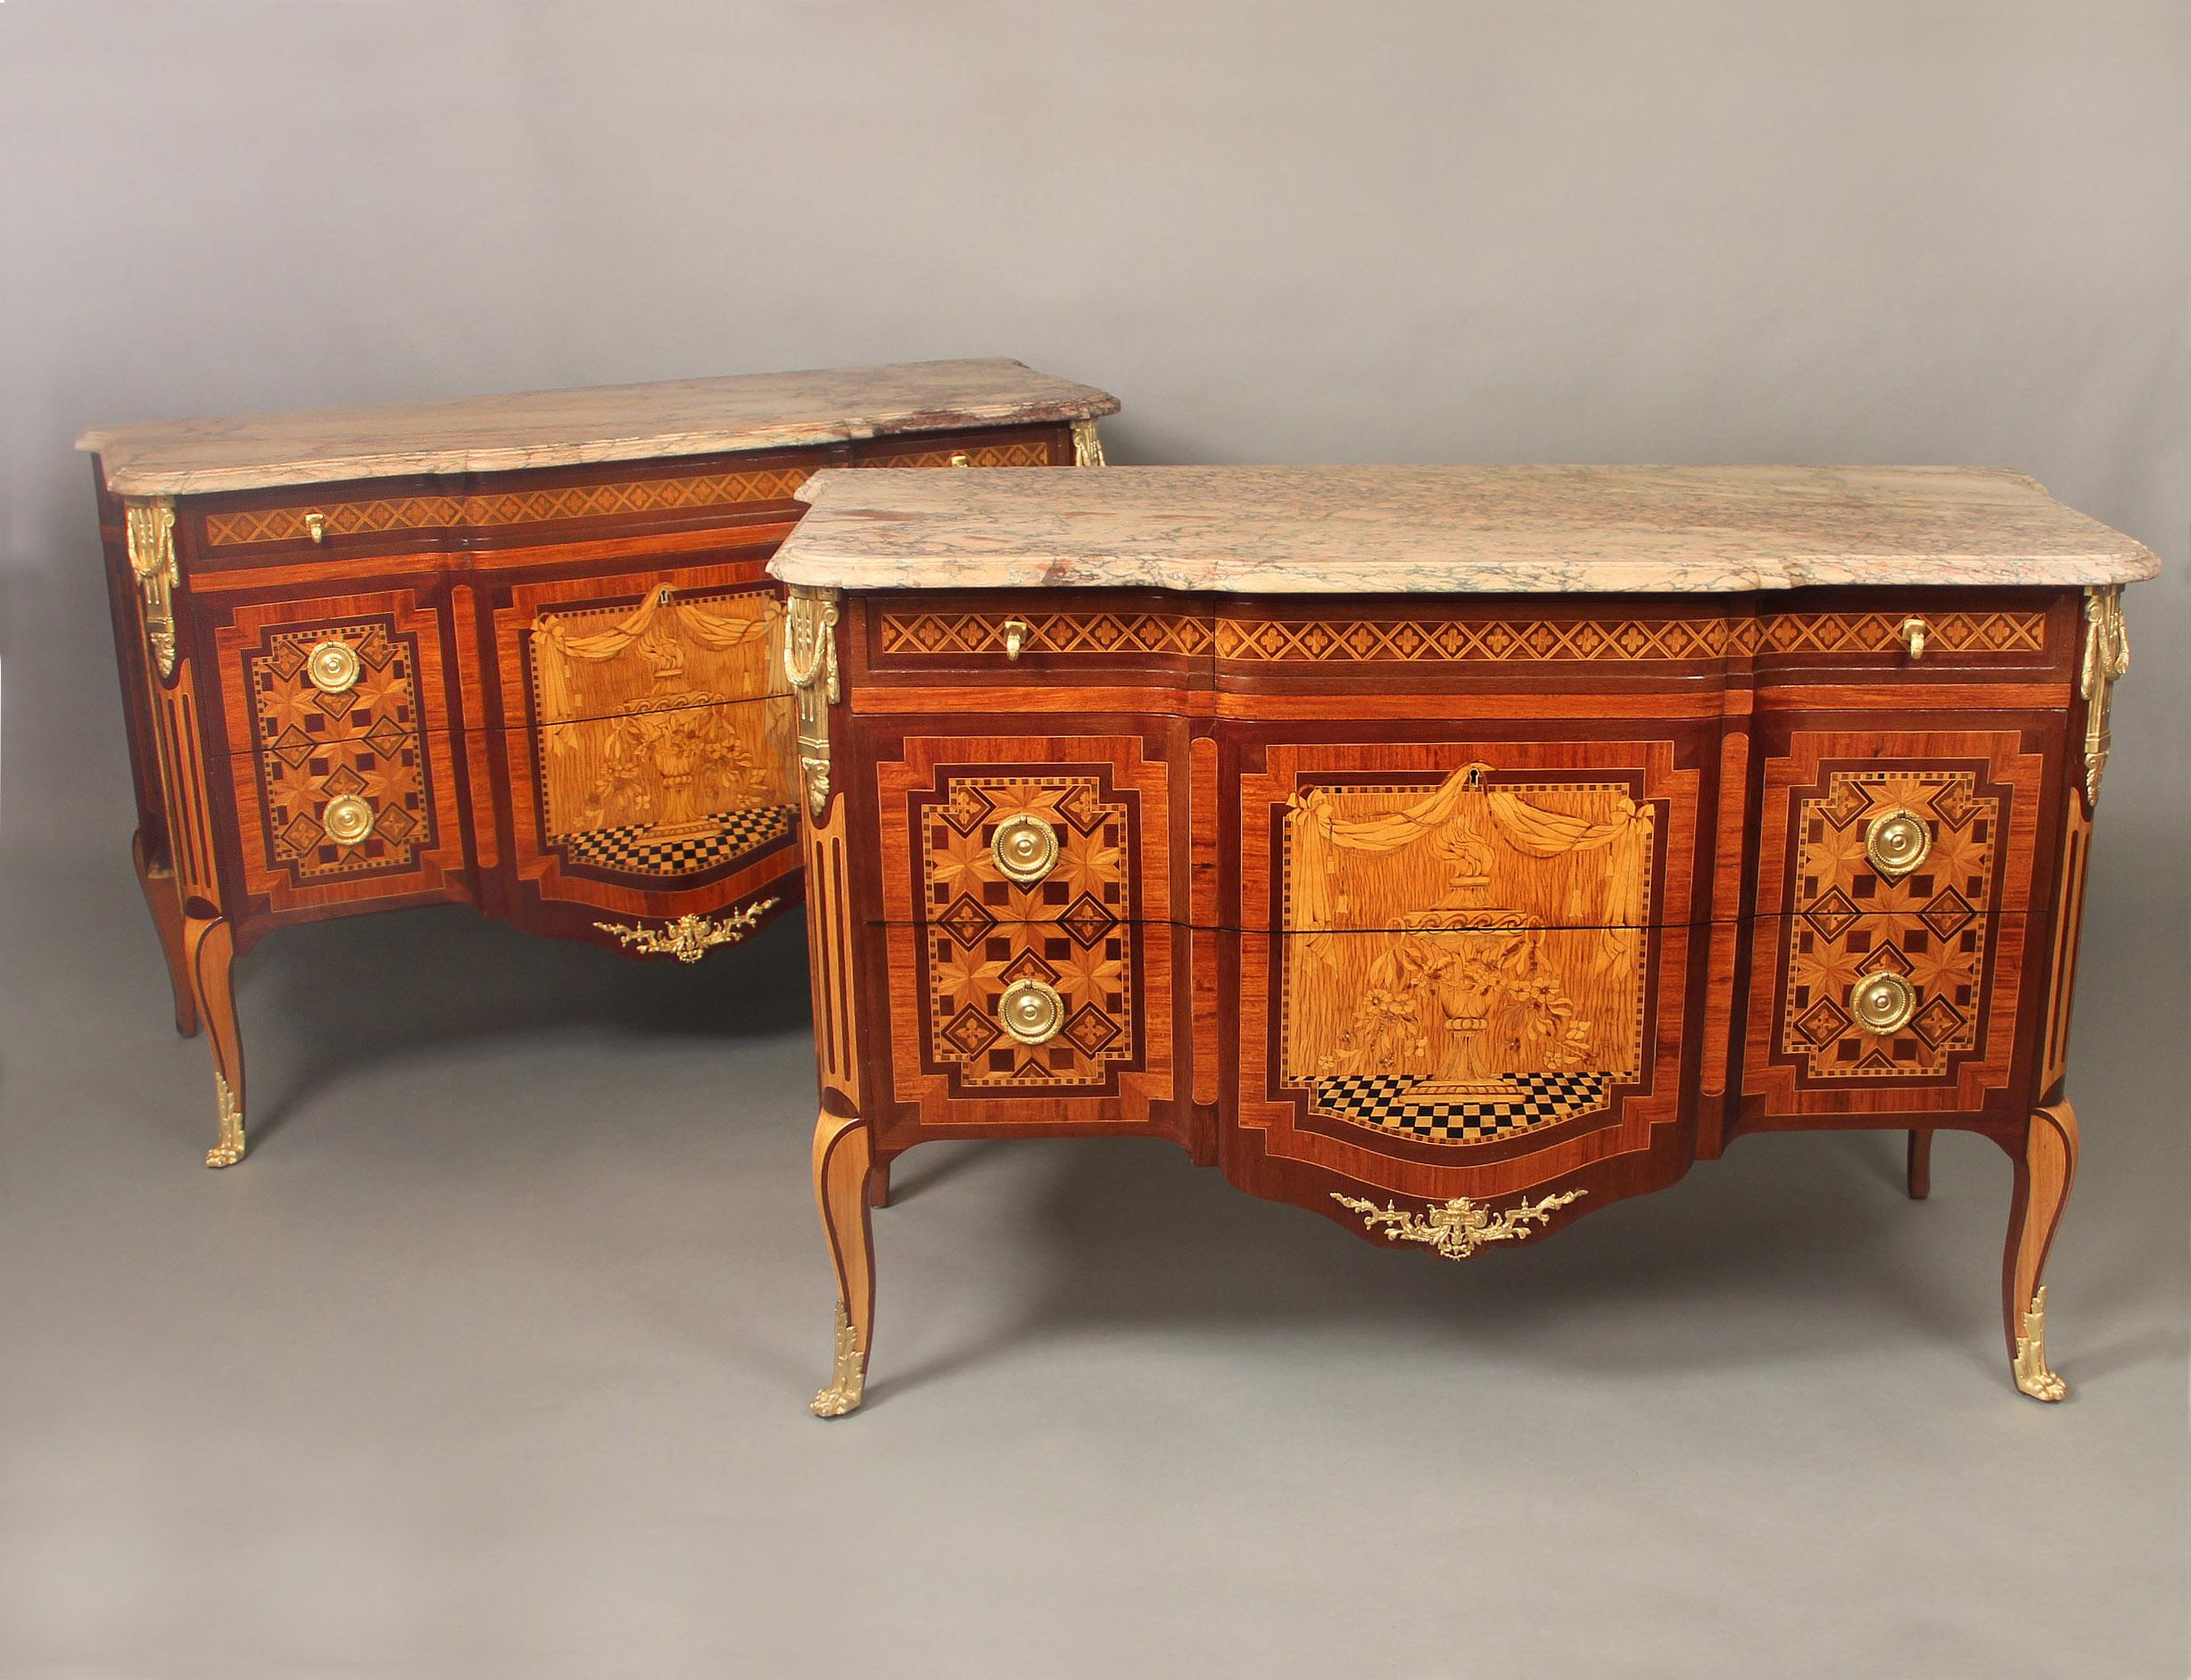 A fantastic pair of early 20th century gilt bronze mounted Louis XV style inlaid marquetry and parquetry commodes.

Each finely made commode with a shaped marble top over three short and two long dresser drawers, the long drawers centered by a